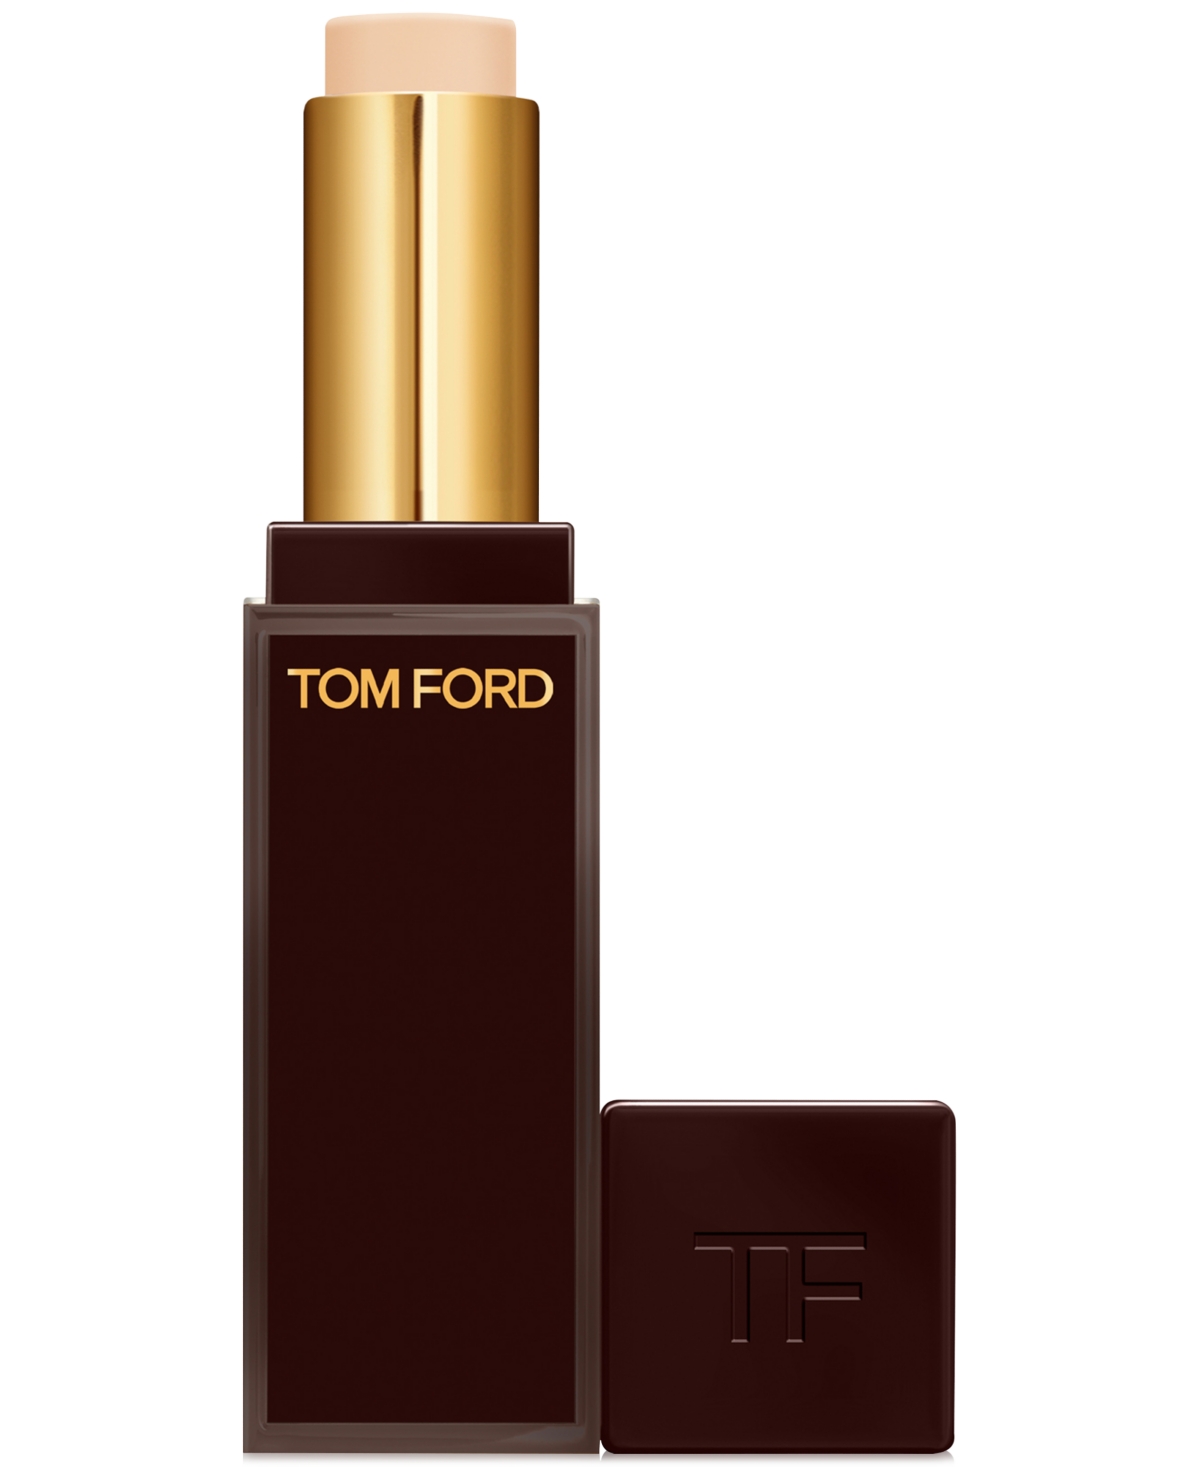 Tom Ford Traceless Soft Matte Concealer In W Shell (fair Skin With Light Yellow Und